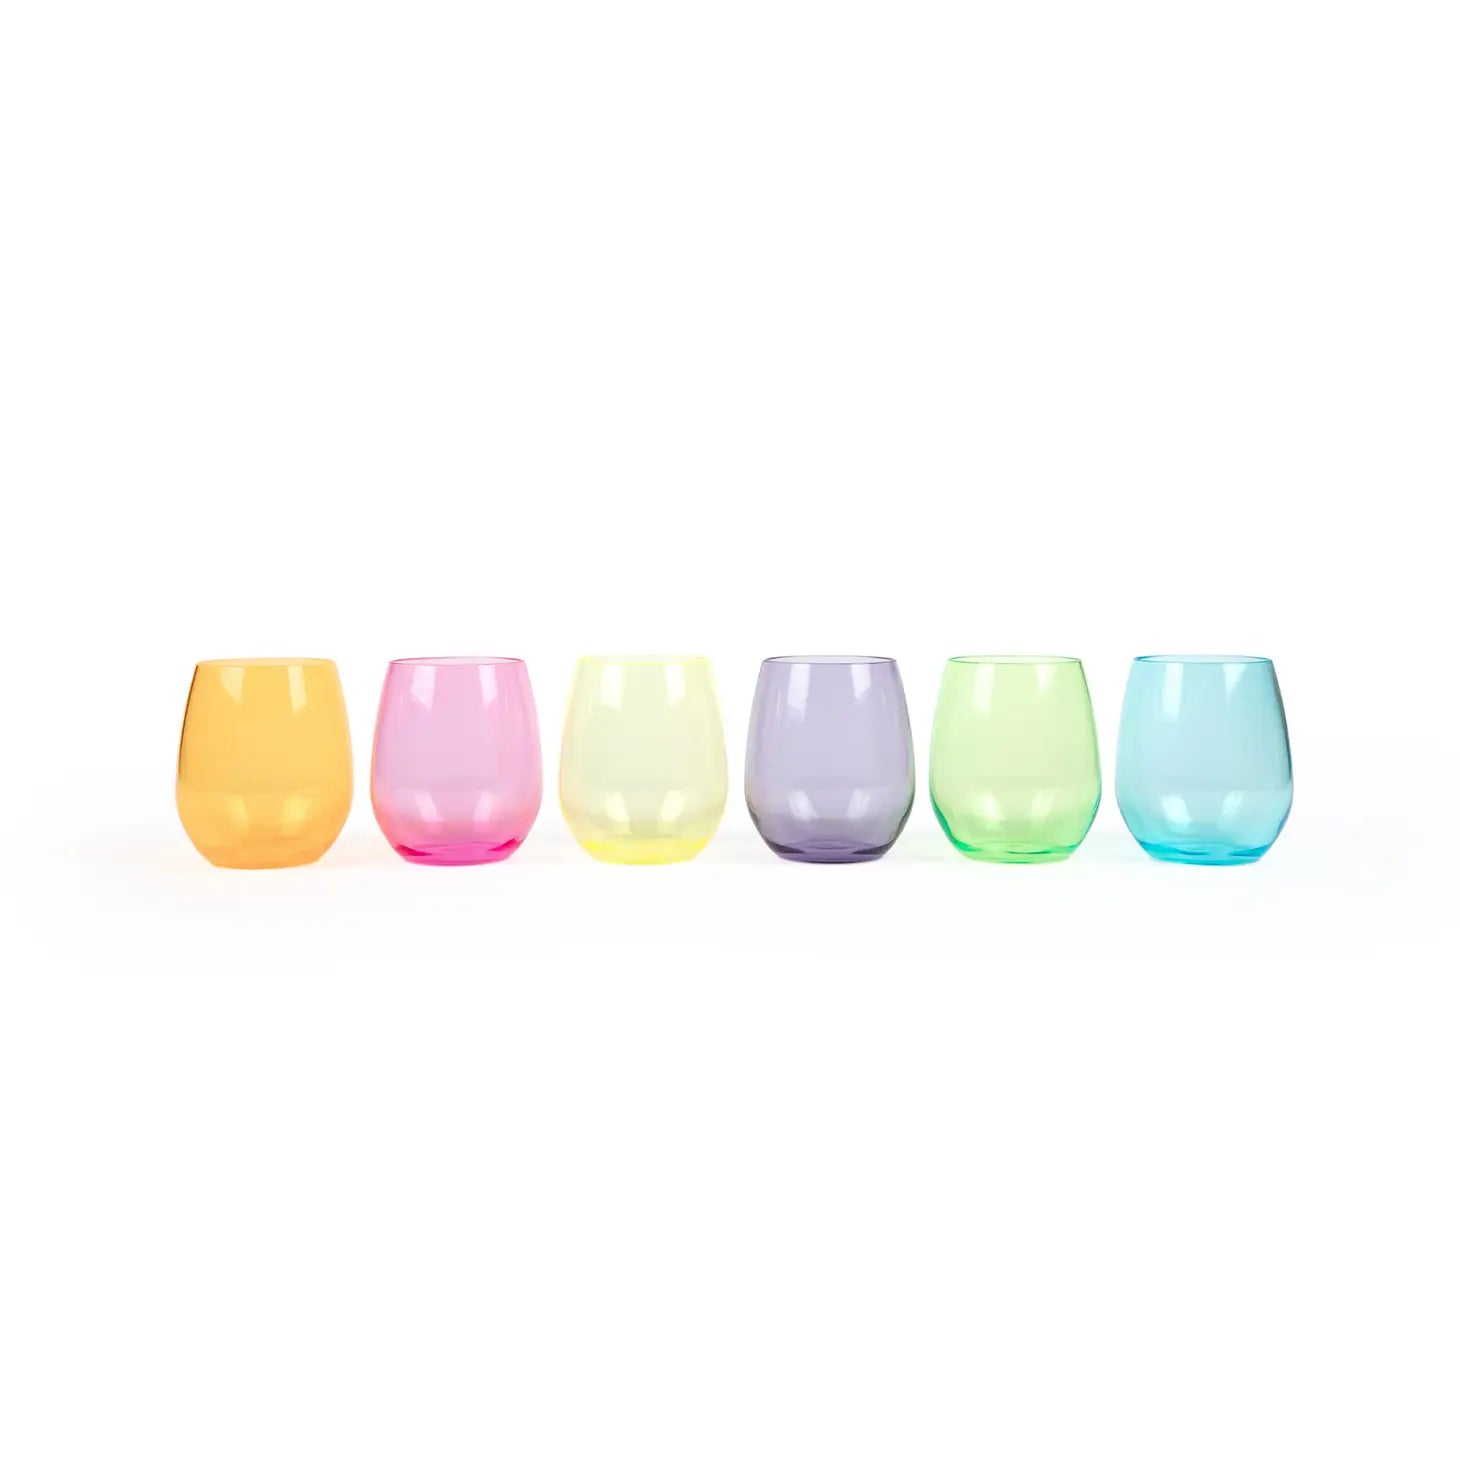 UNBREAKABLE COLORED STEMLESS WINE GLASSES